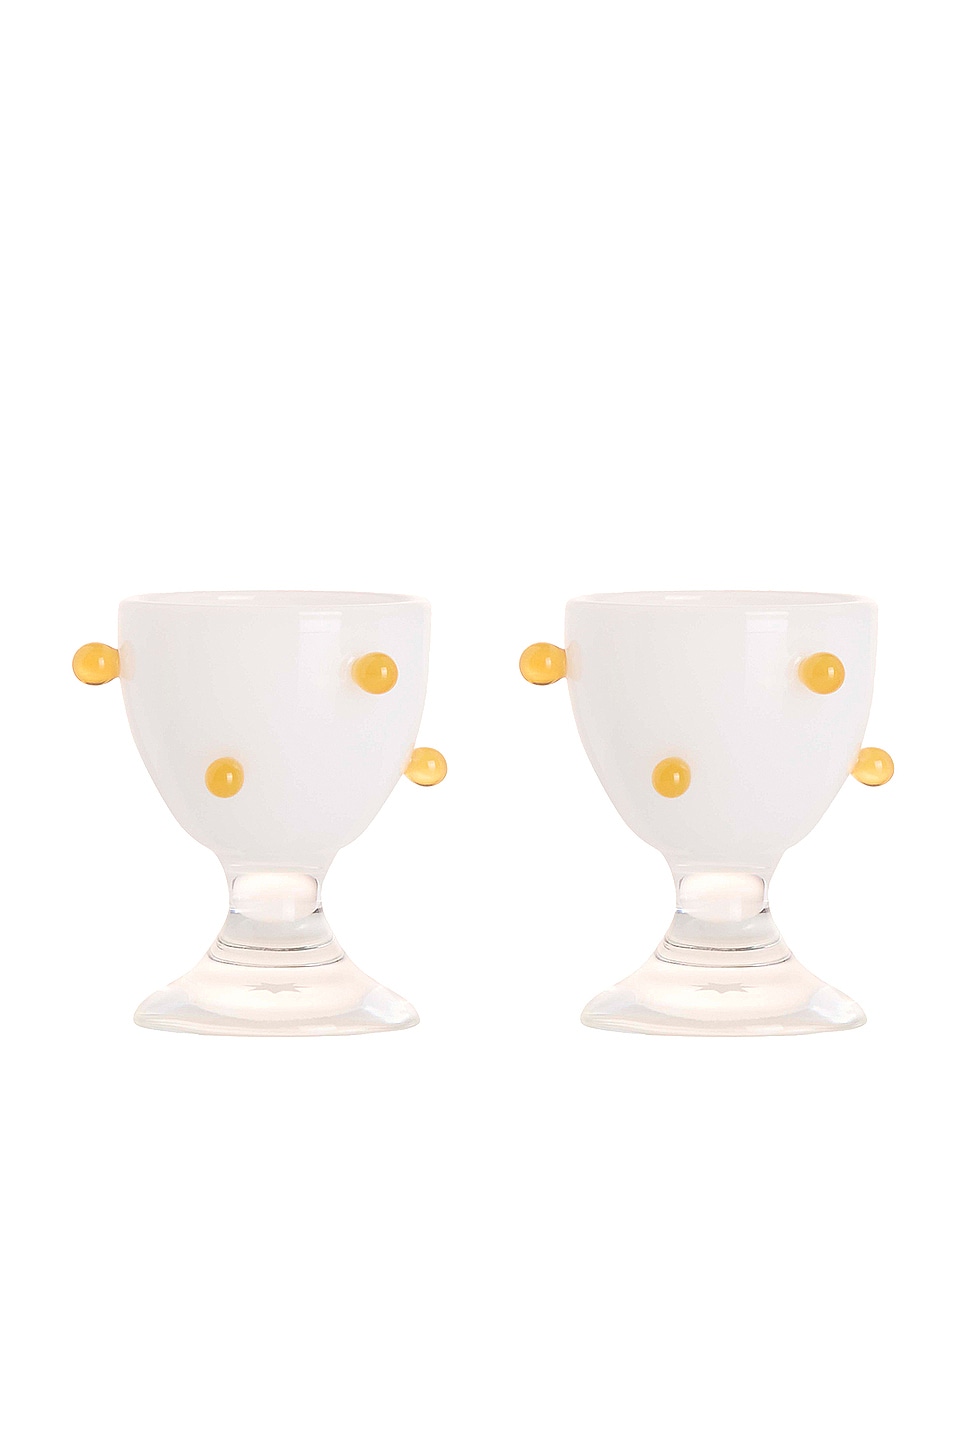 Image 1 of Maison Balzac 2 Pomponette Egg Cups in Clear, White, & Yellow